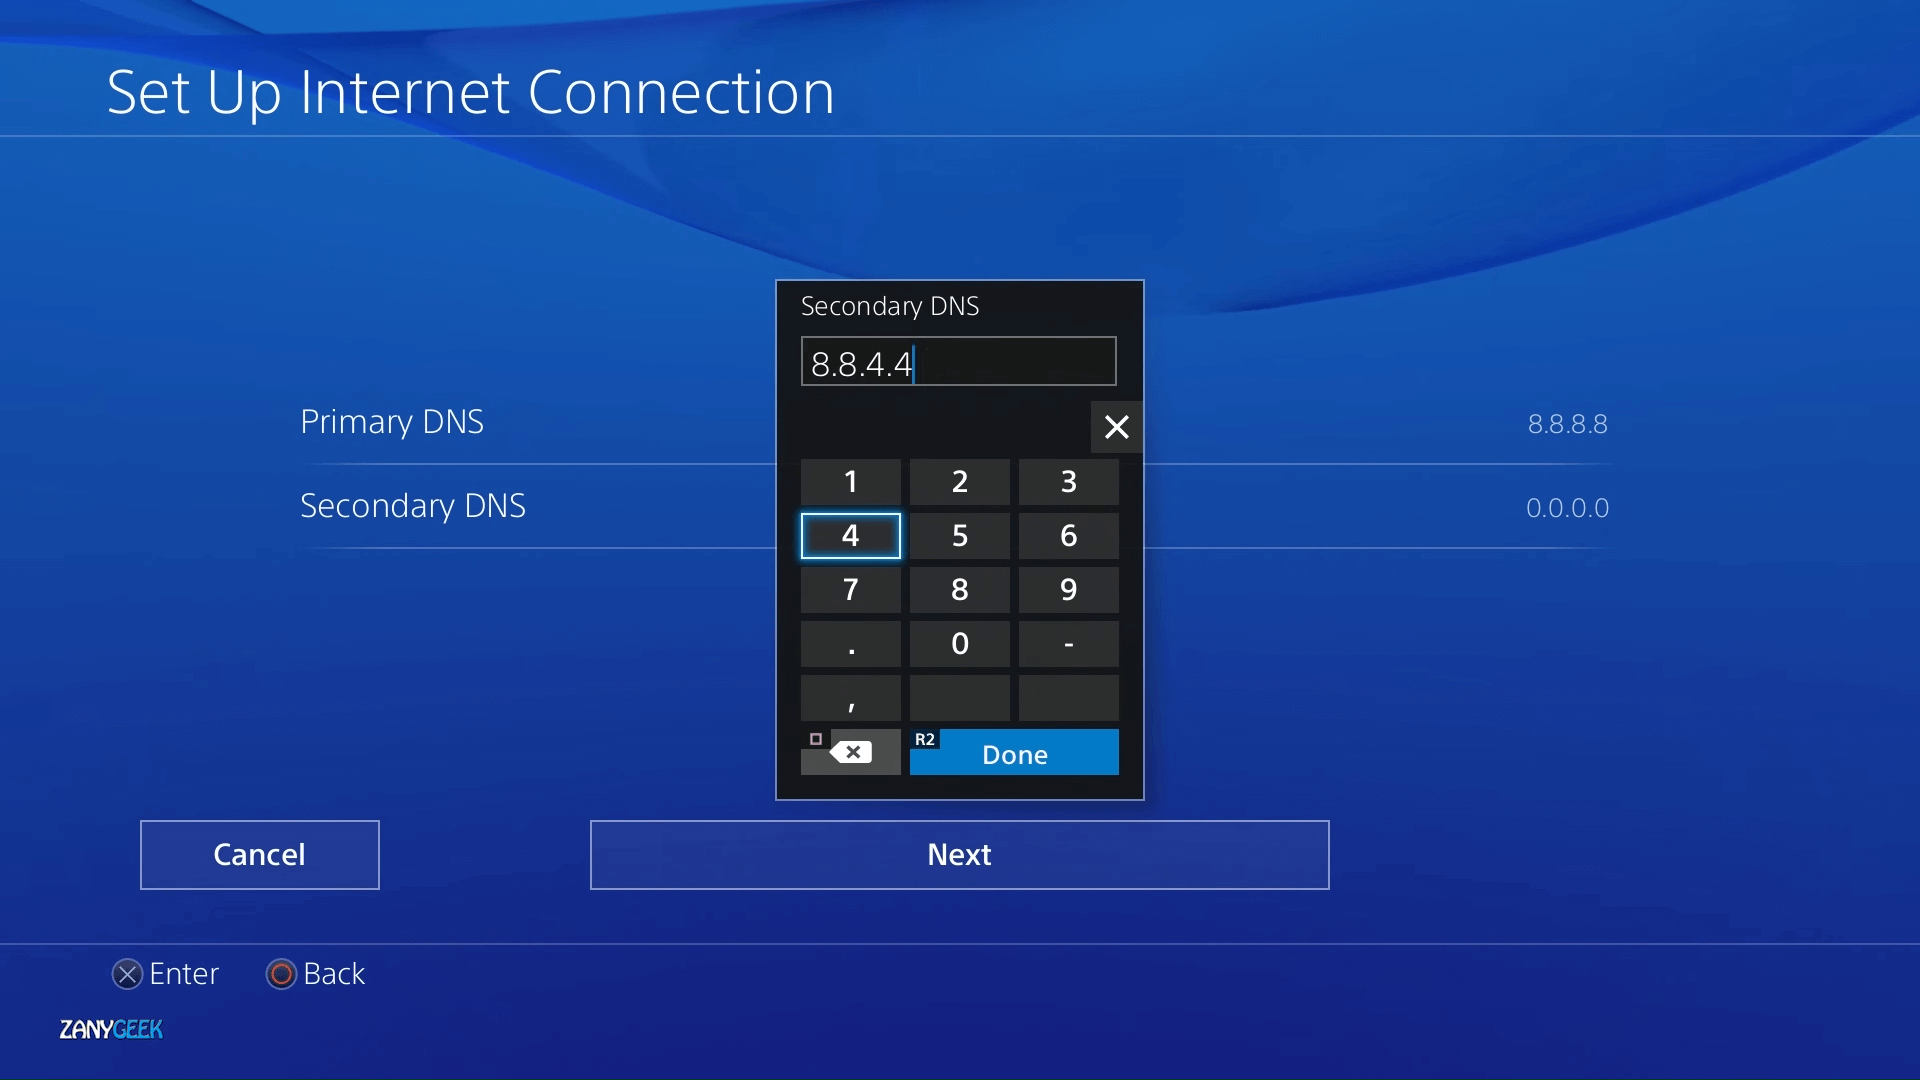 PS4: A DNS error has occured [NW